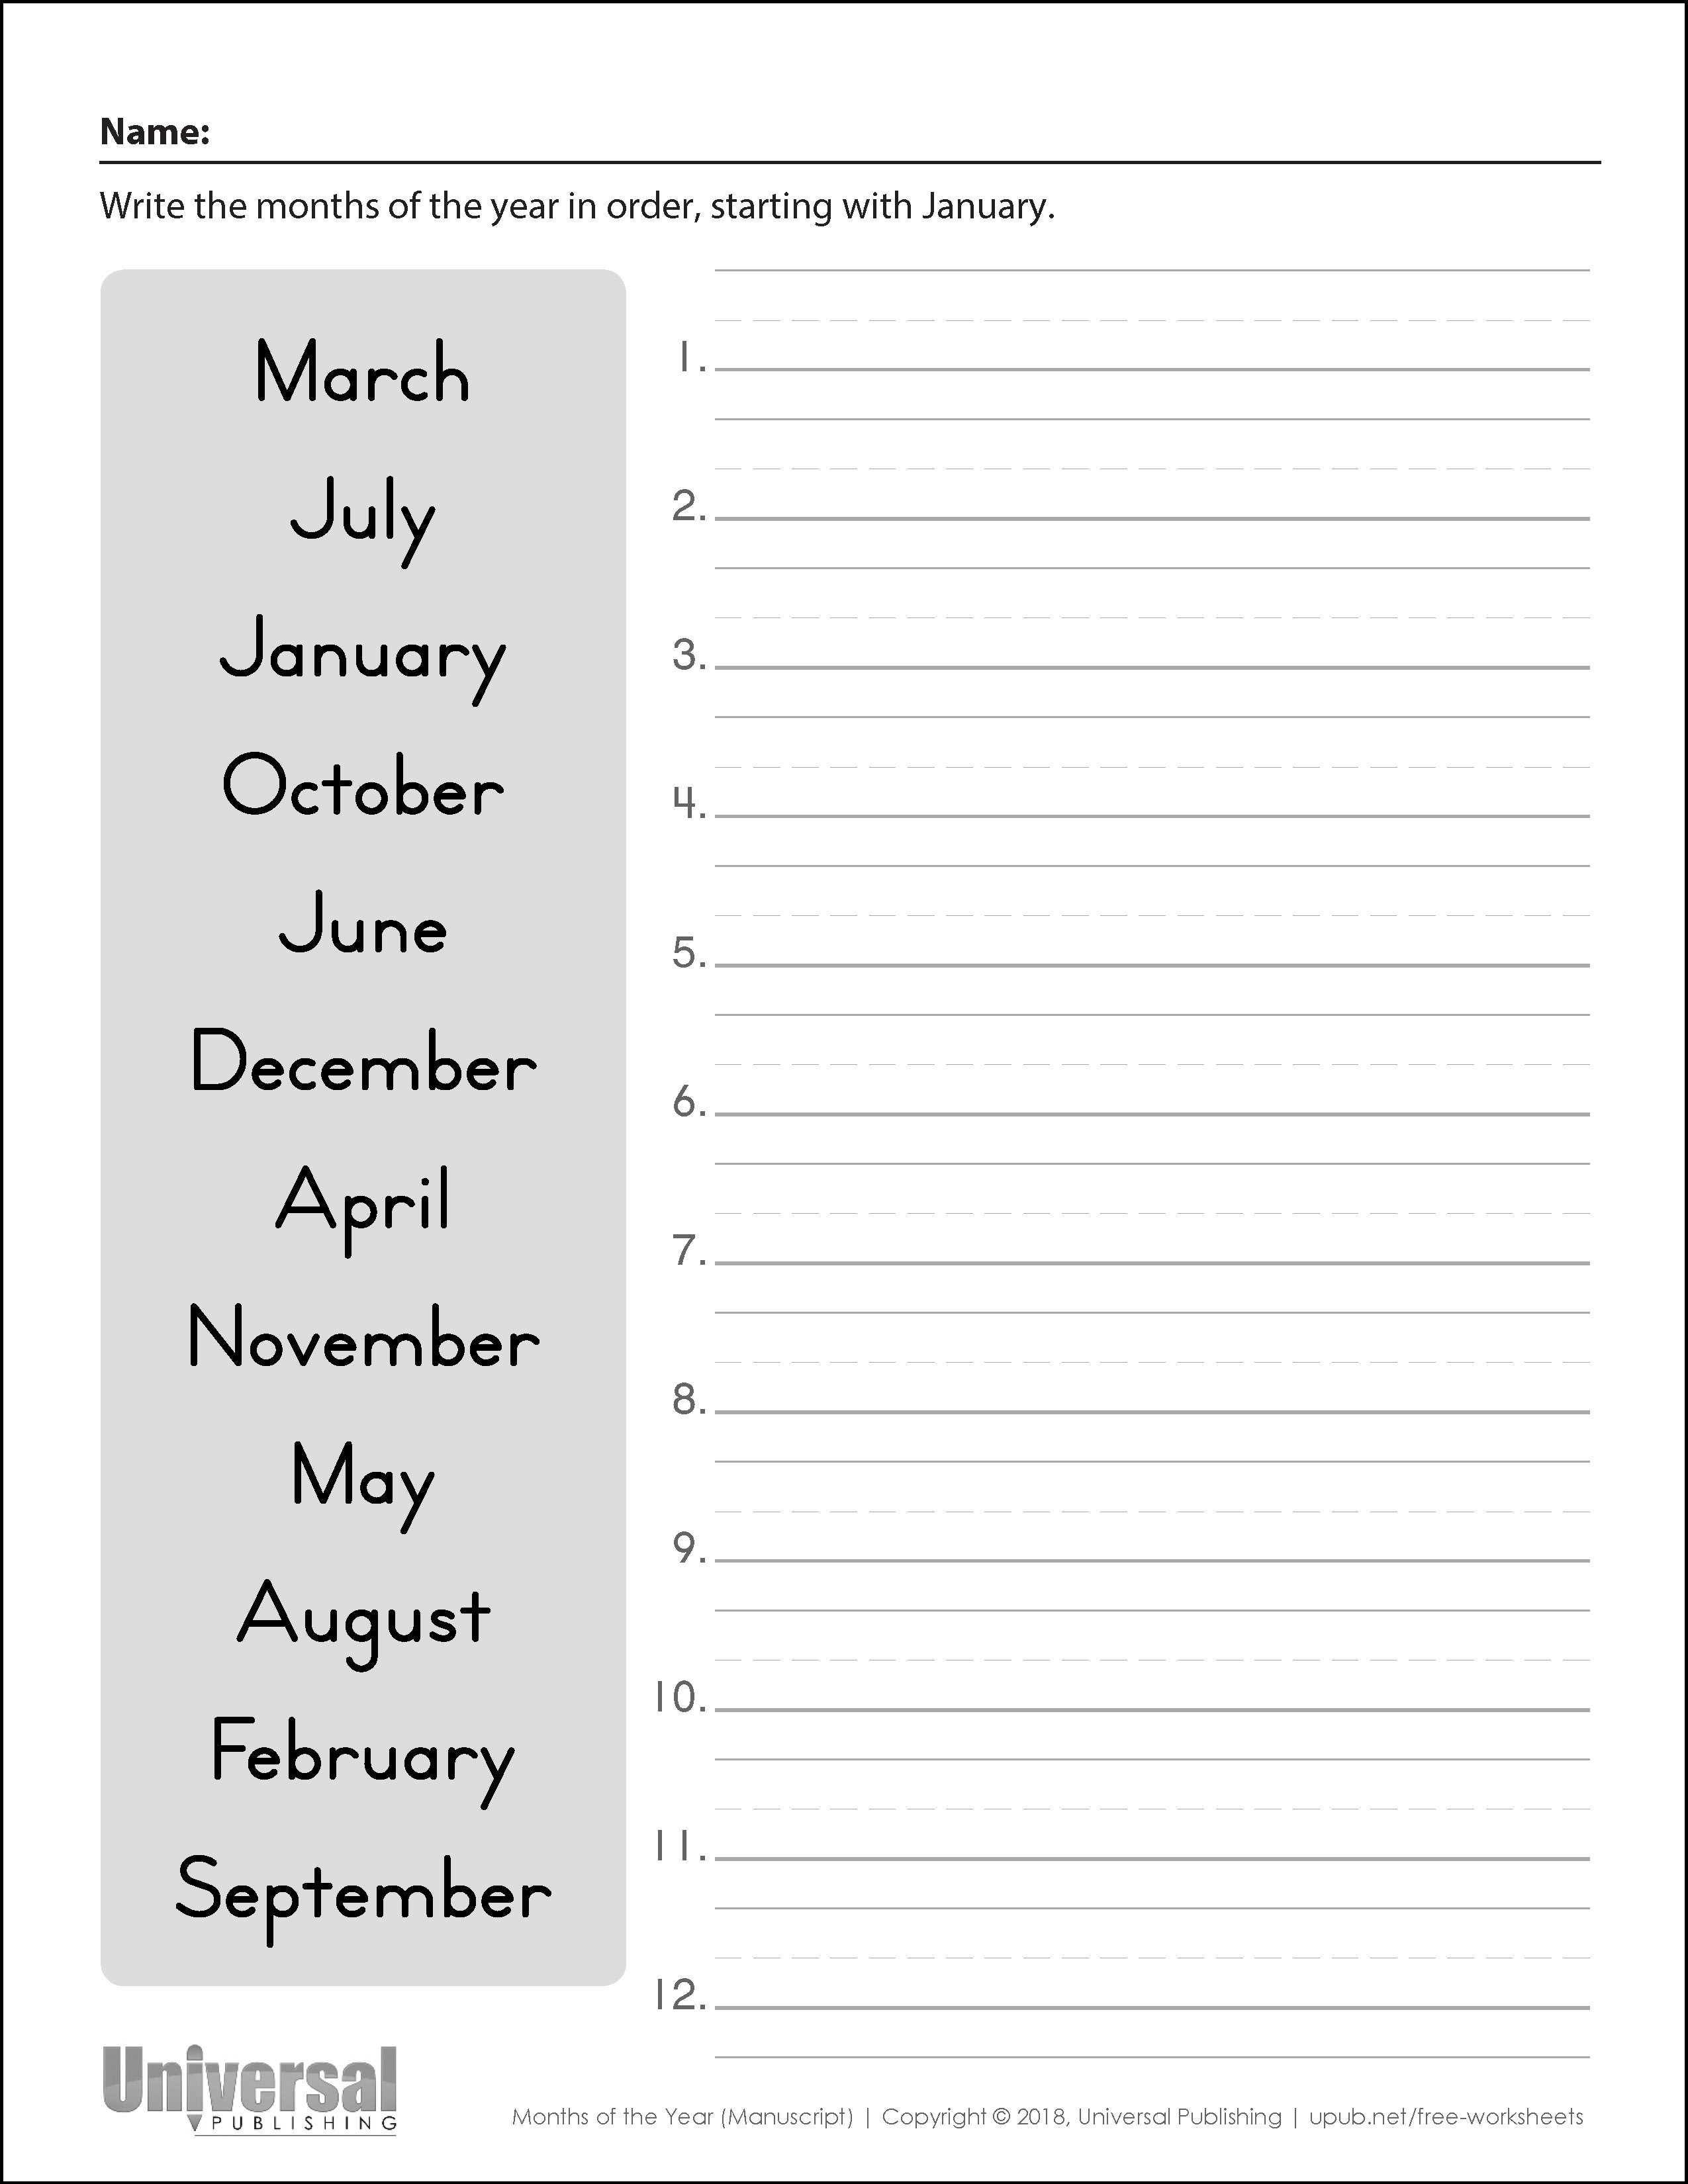 Months of the Year Manuscript